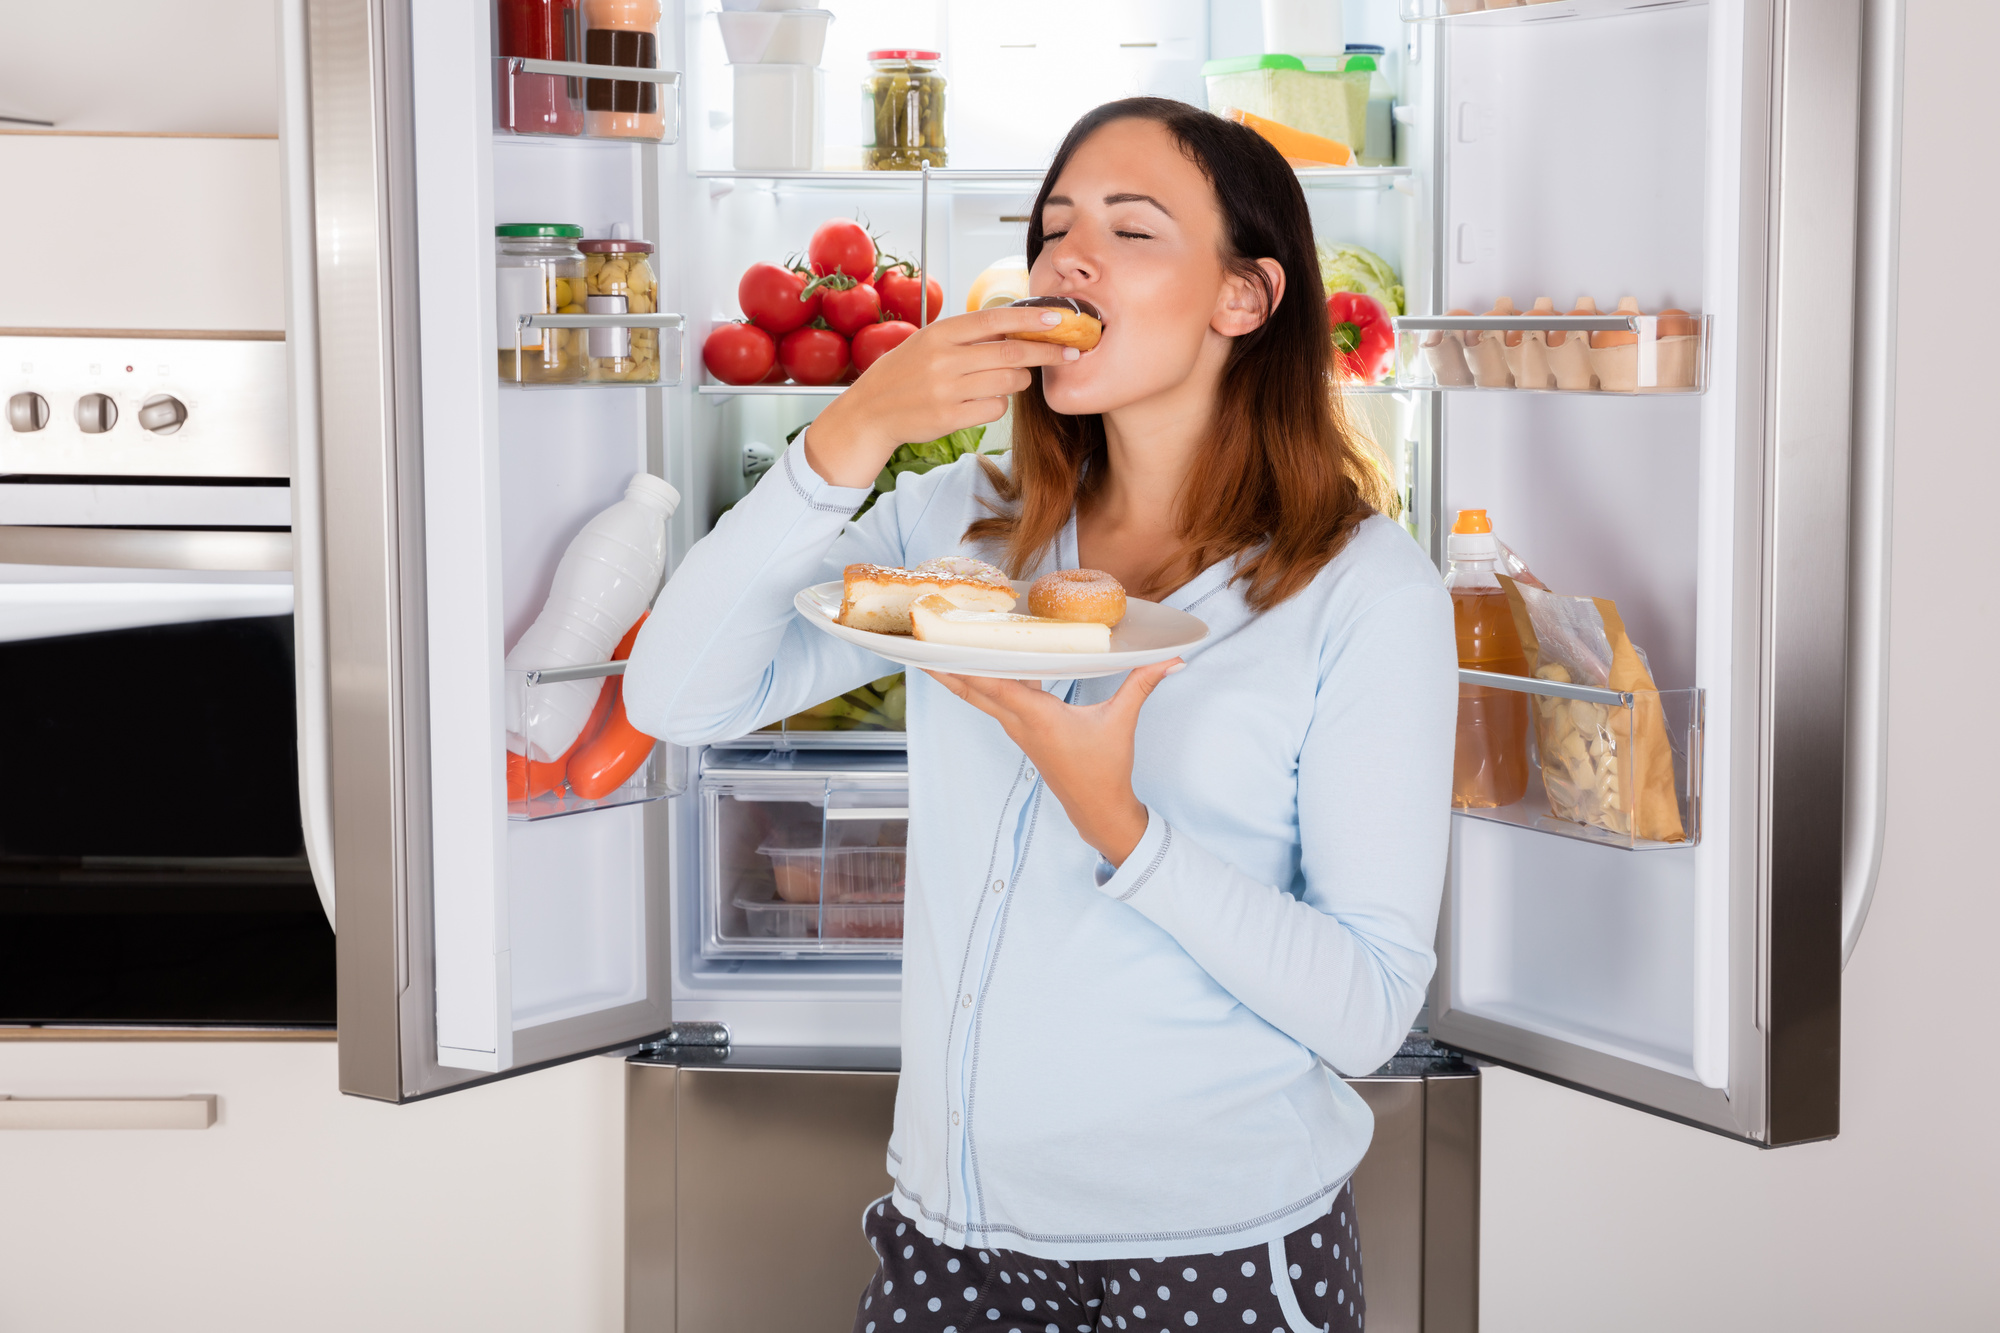 6 Tips And Tricks To Control Food Cravings